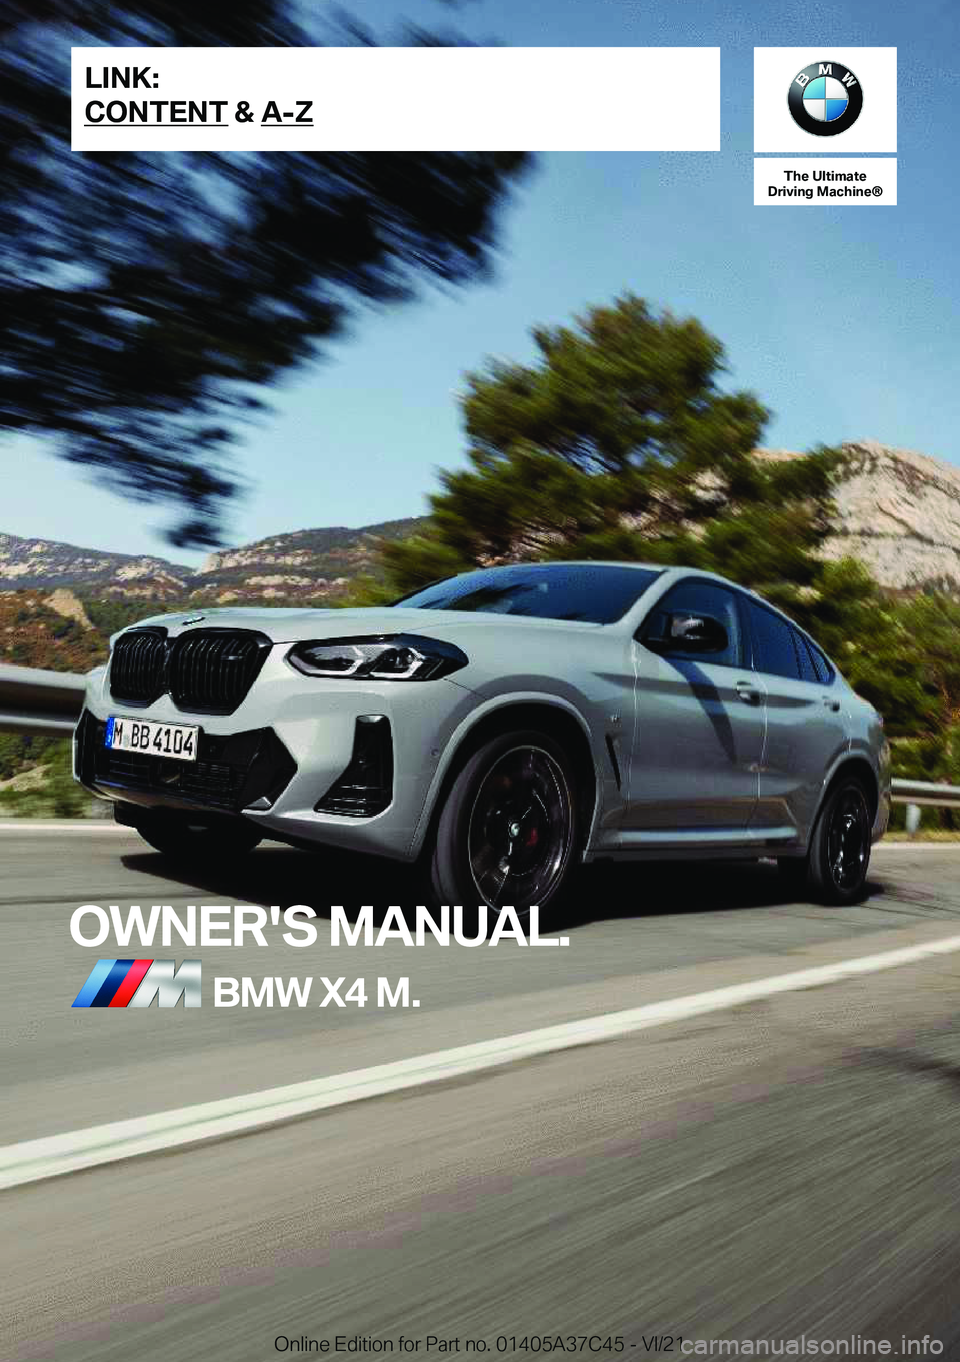 BMW X4 M 2022  Owners Manual �T�h�e��U�l�t�i�m�a�t�e
�D�r�i�v�i�n�g��M�a�c�h�i�n�e�n
�O�W�N�E�R�'�S��M�A�N�U�A�L�.�B�M�W��X�4��M�.�L�I�N�K�:
�C�O�N�T�E�N�T��&��A�-�Z�O�n�l�i�n�e��E�d�i�t�i�o�n��f�o�r��P�a�r�t��n�o�